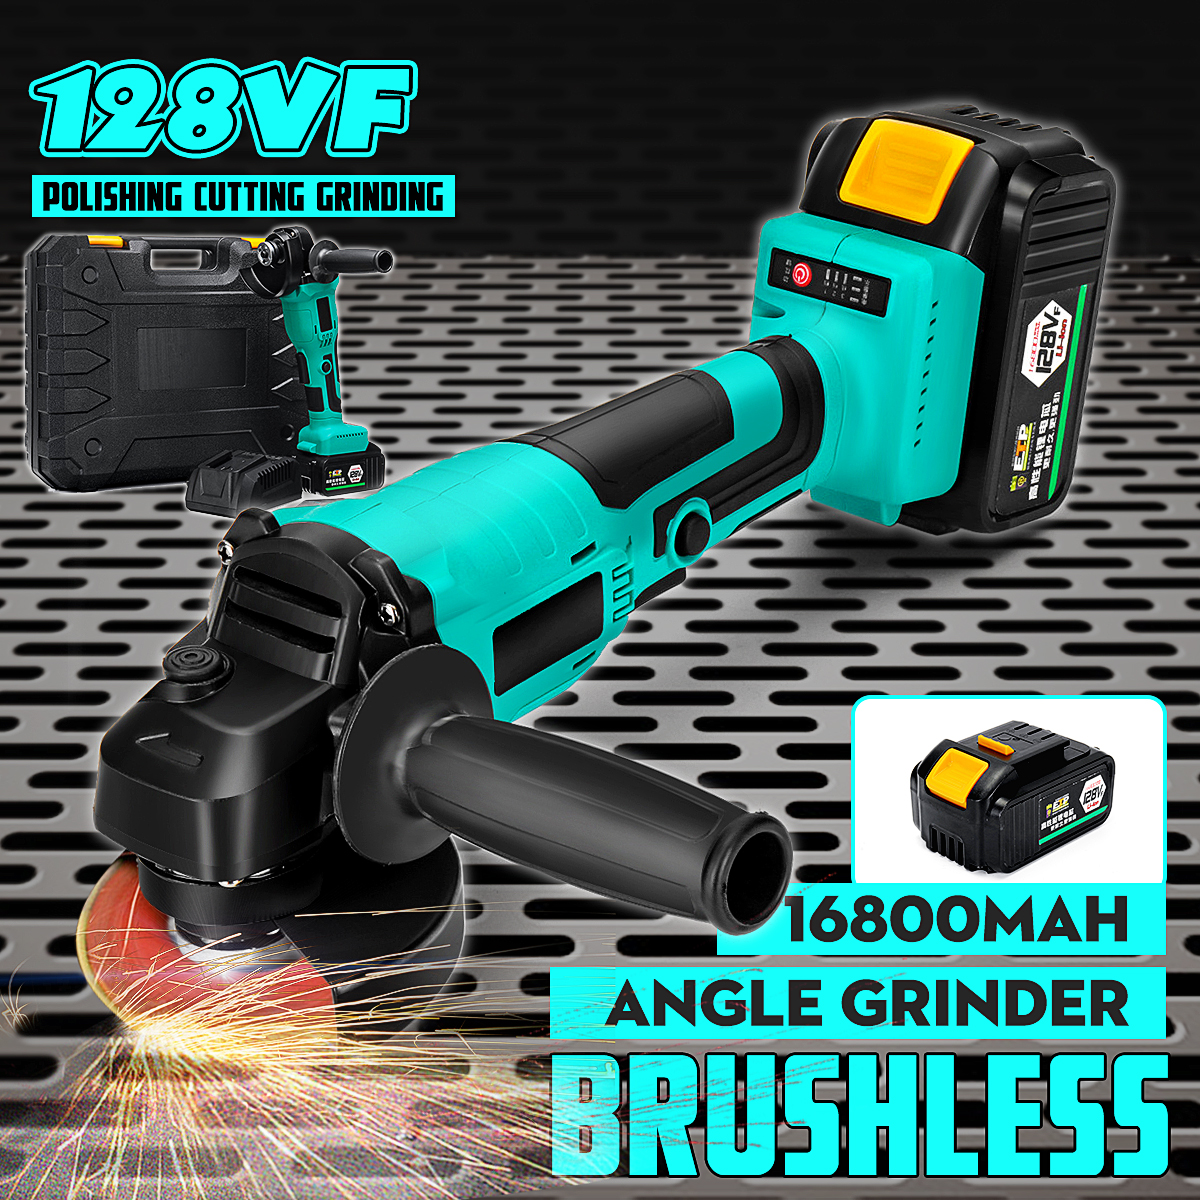 128VF-1300W-10000RPM-Cordless-Brushless-Angle-Grinder-with-16800mAh-Li-Ion-Battery-1520444-1